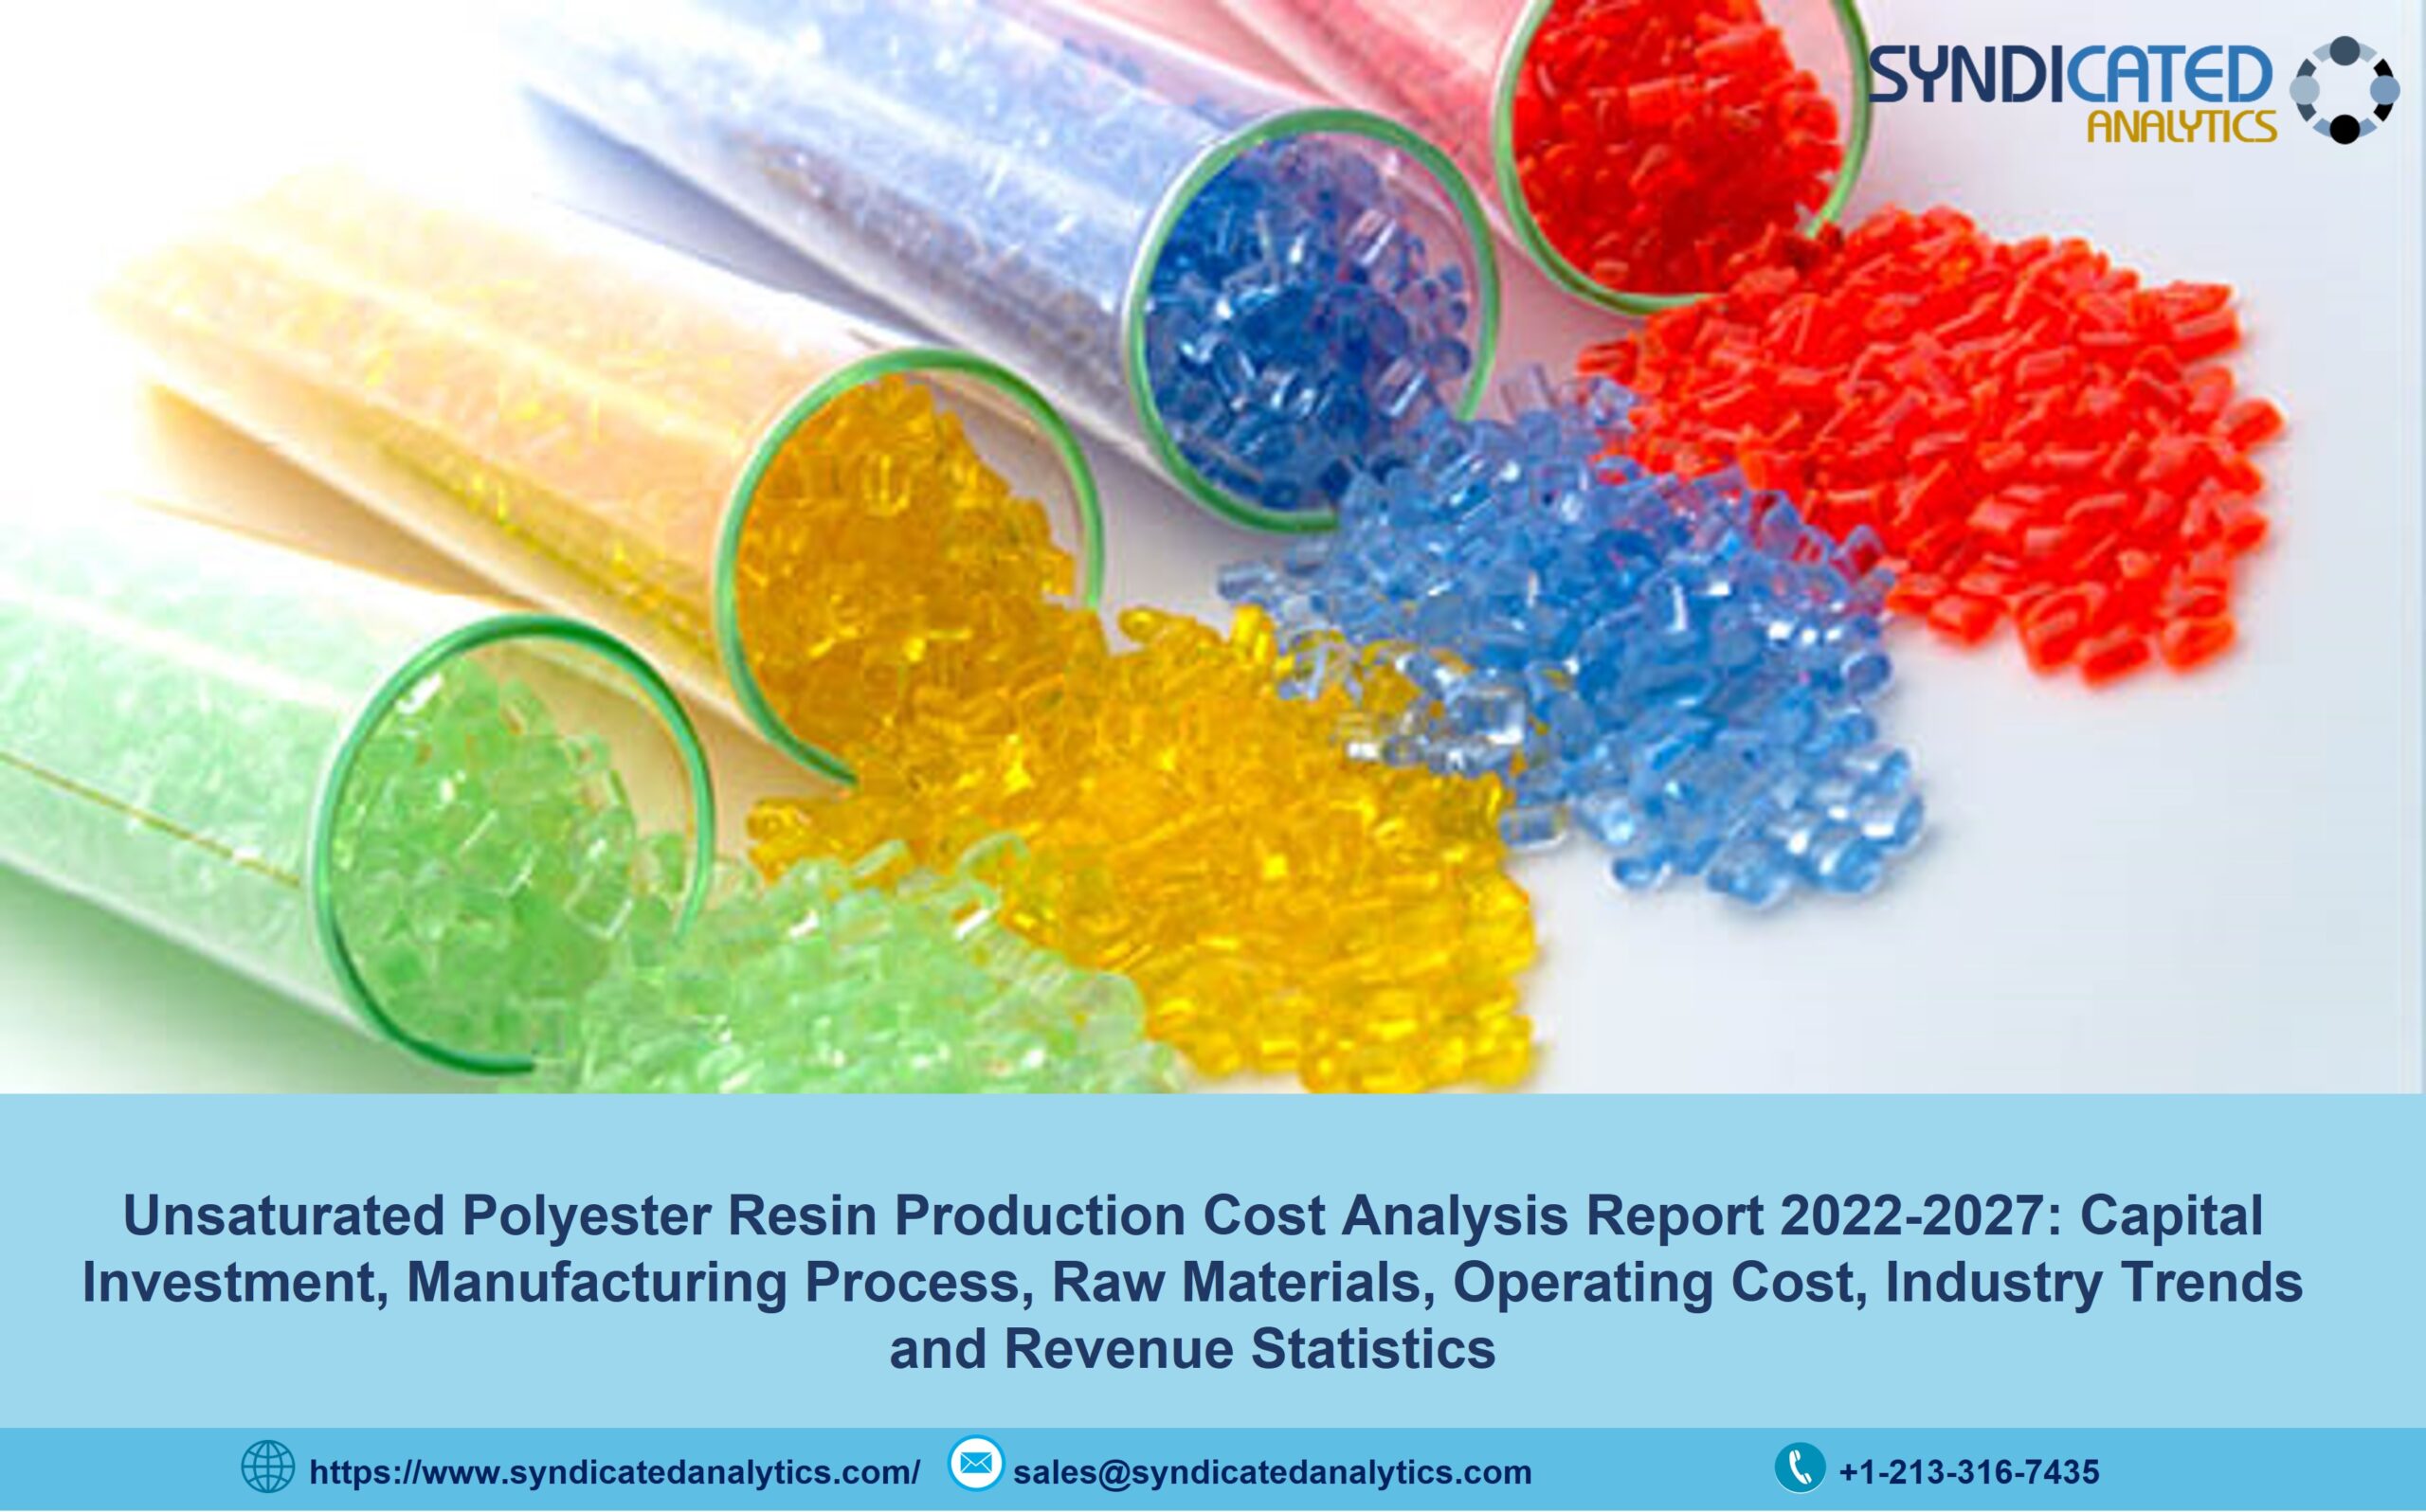 Unsaturated Polyester Resin Production Cost